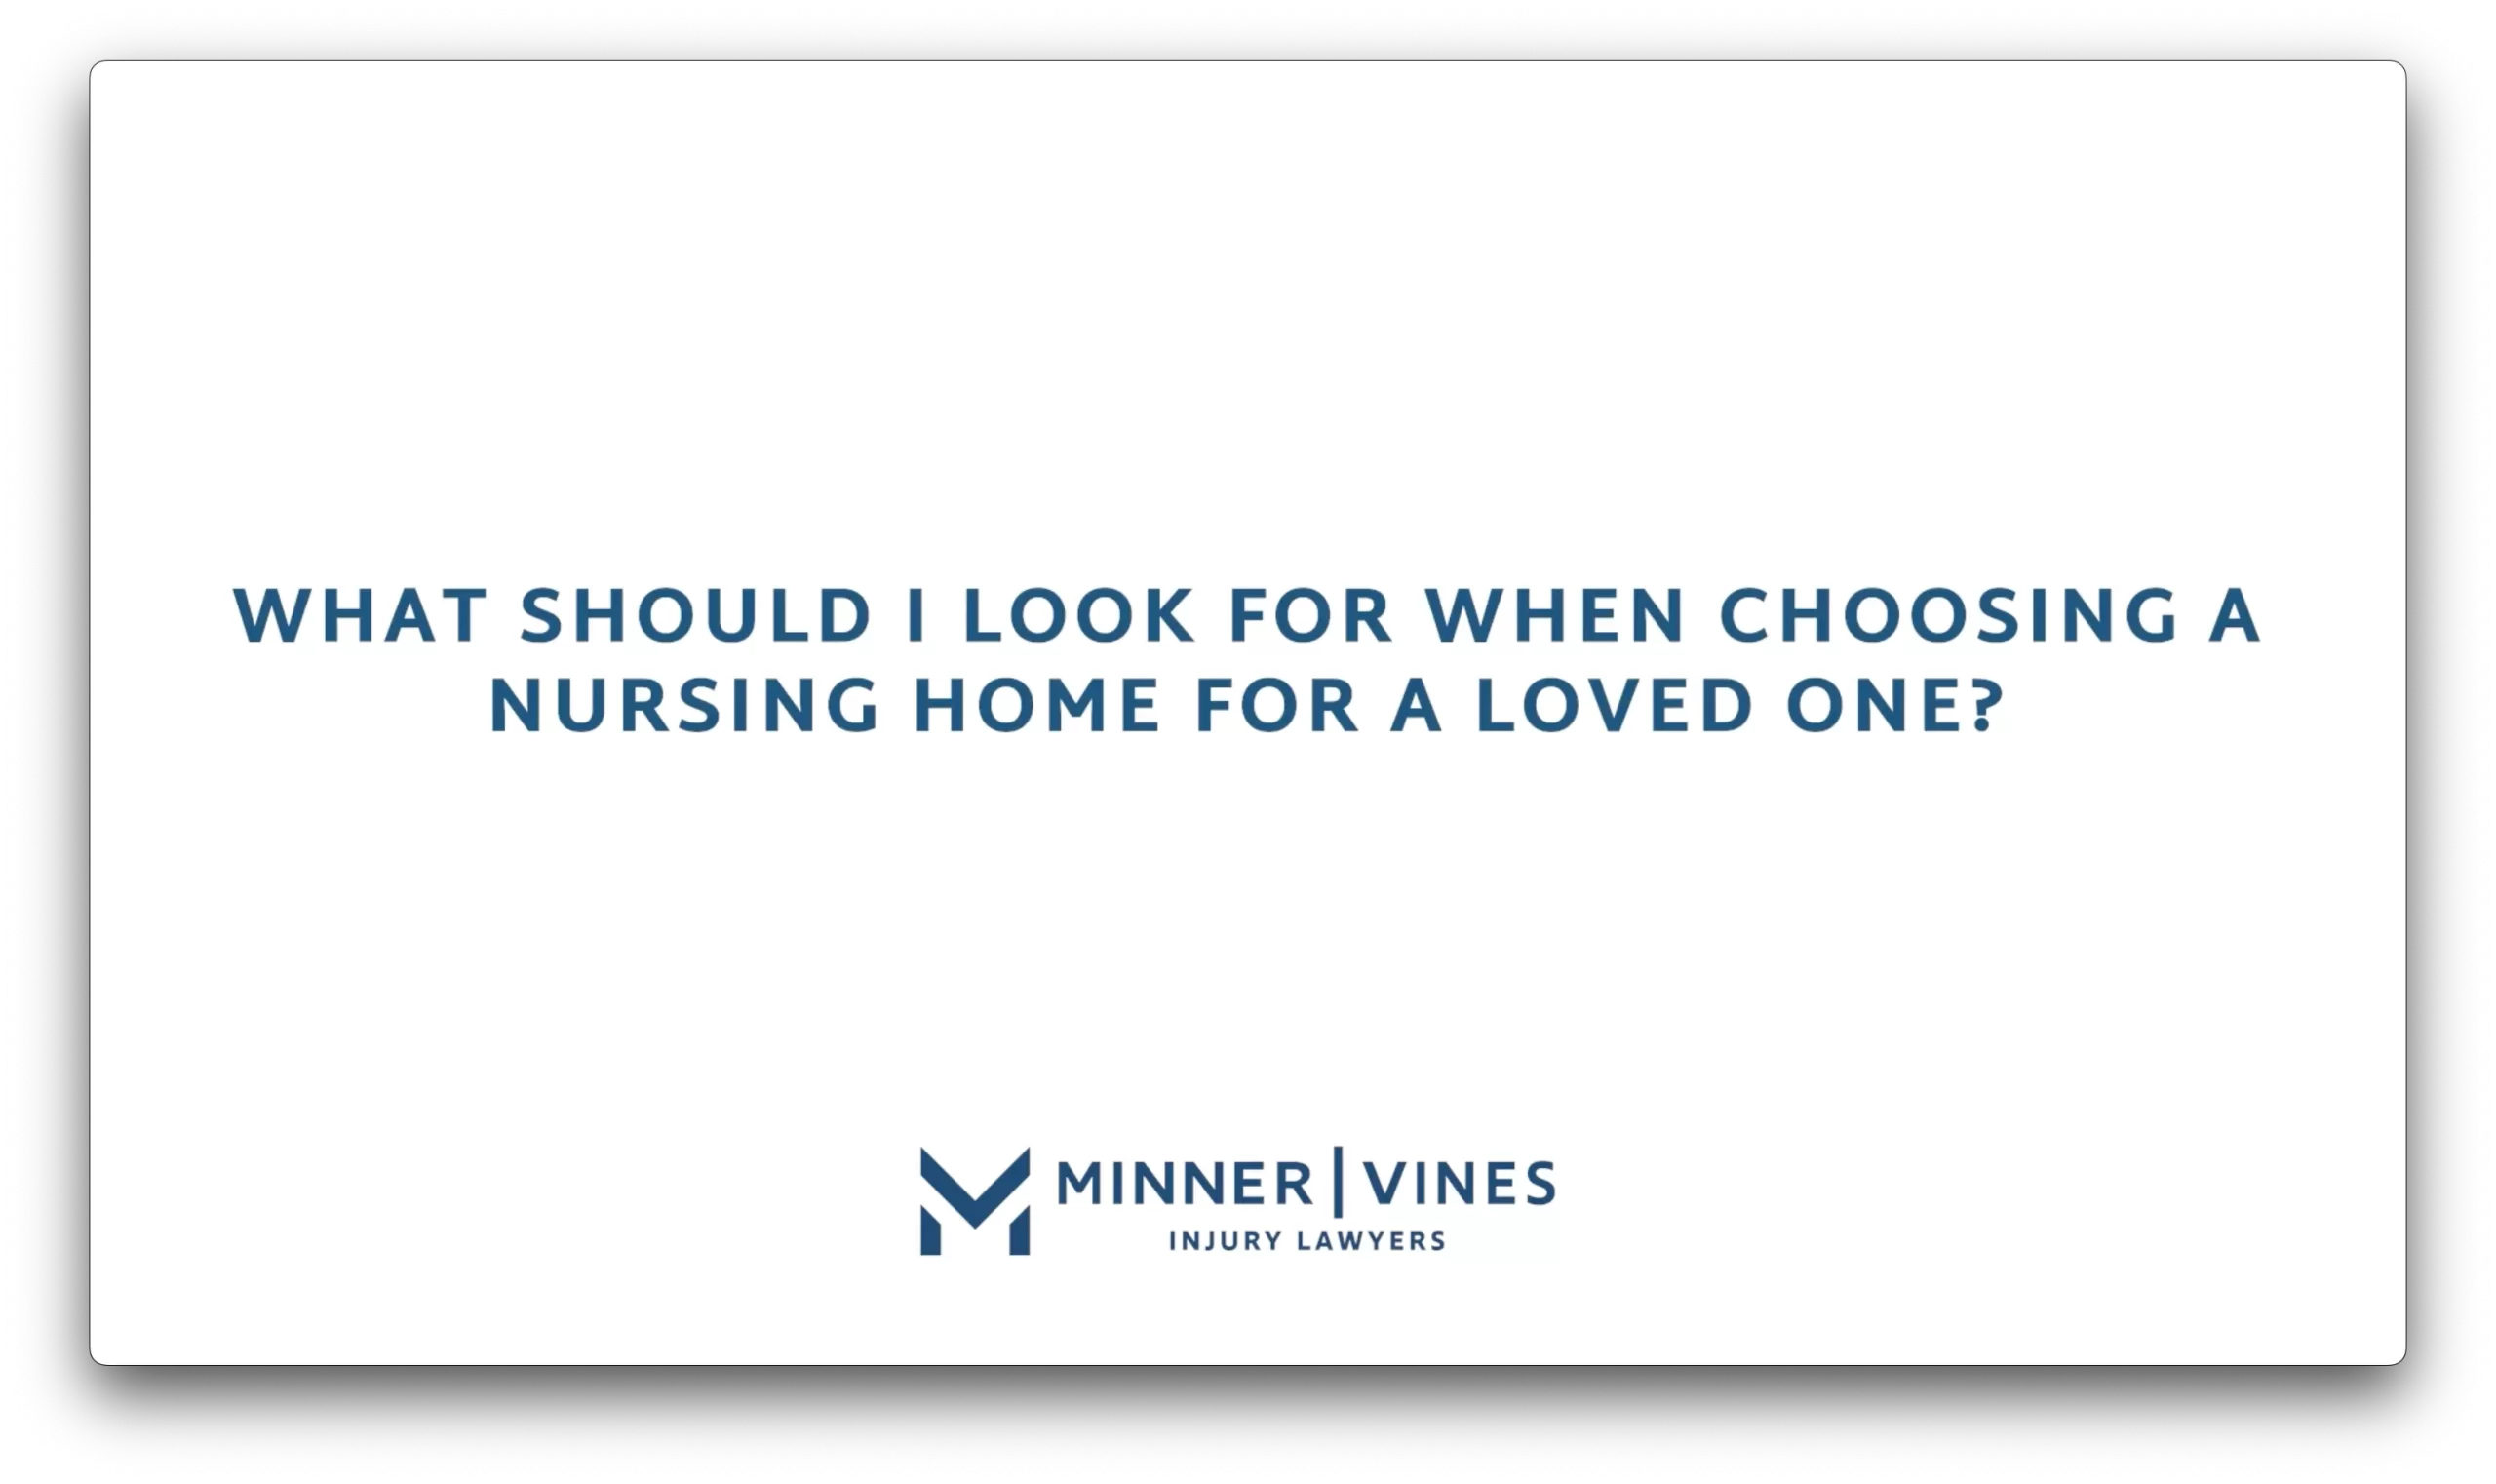 What should I look for when choosing a nursing home for a loved one?